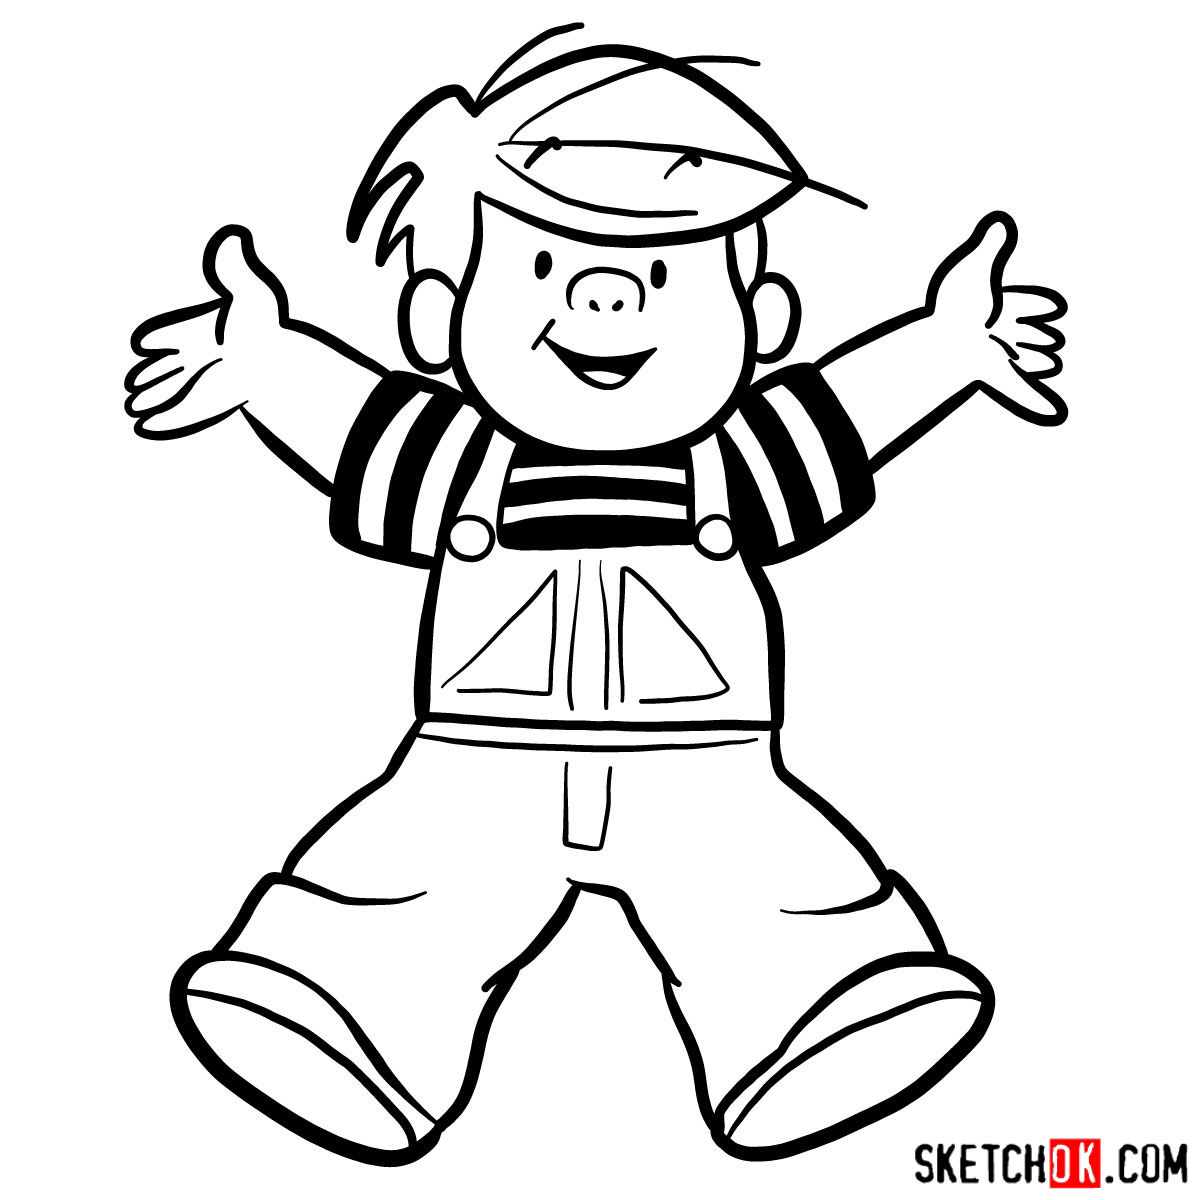 How to draw Dennis the Menace - step 09